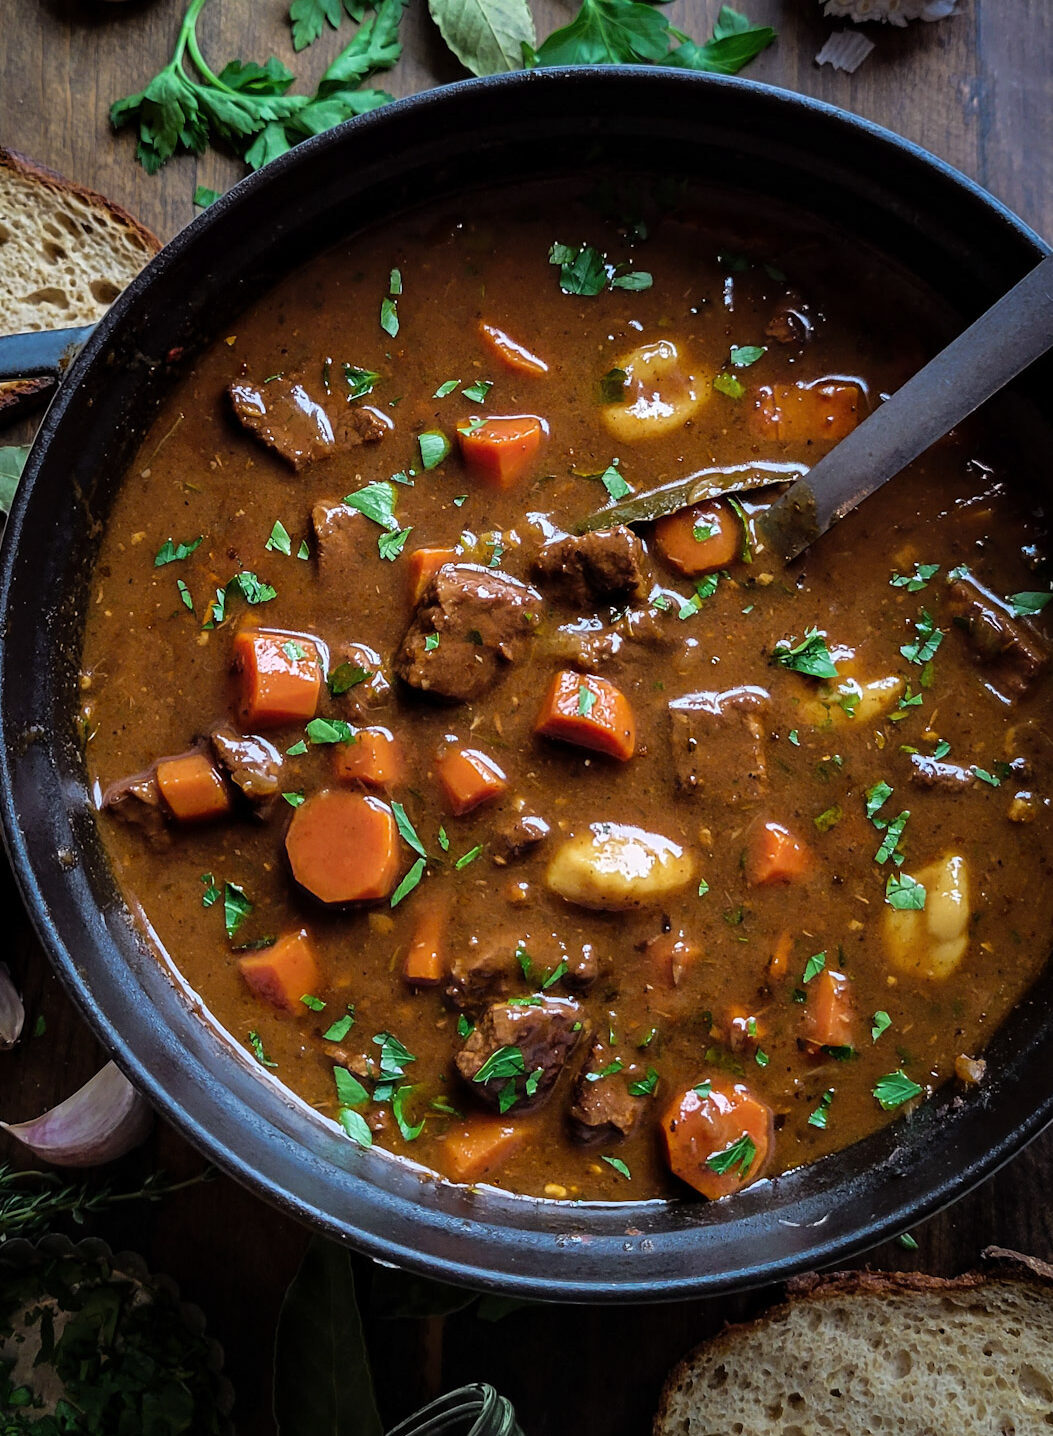 A pot filled with rich and hearty Goulash Soup, filled with beef, carrots, gnocchi, thyme and parsley. There are slices of sourdough bread, and fresh parsley scattered around the pot.